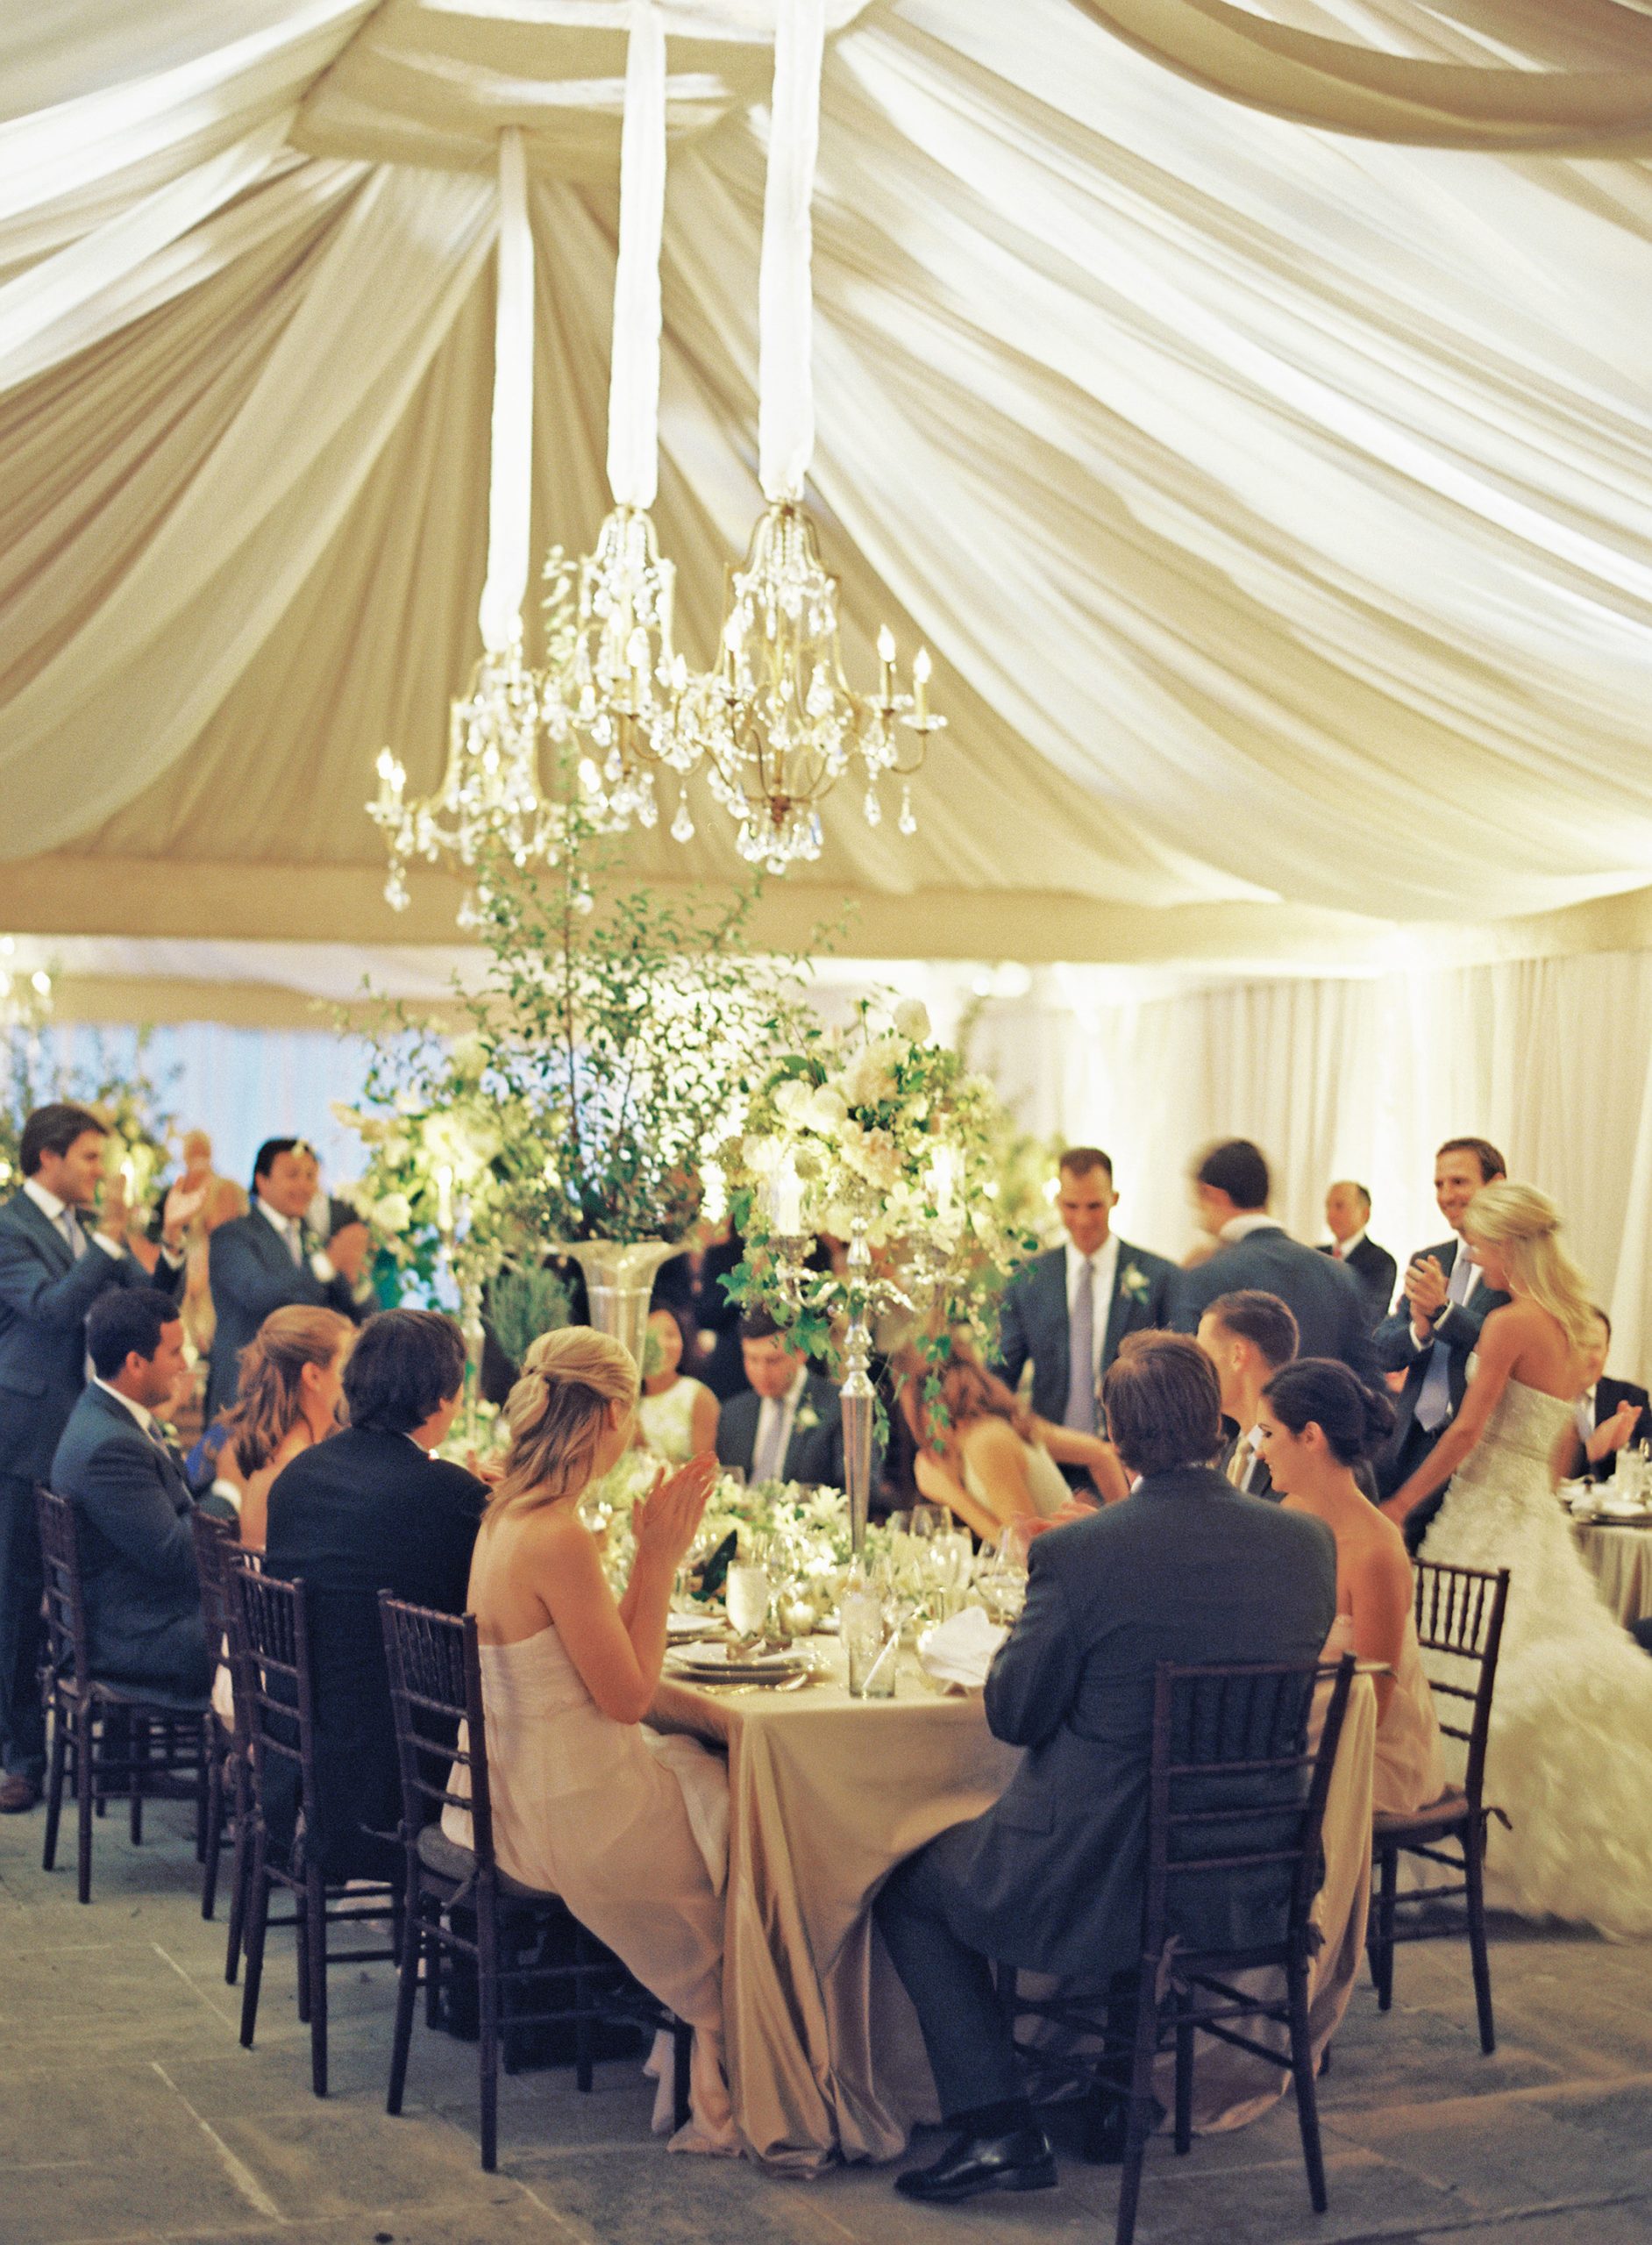 Should You Have a Singles Table at Your Wedding?